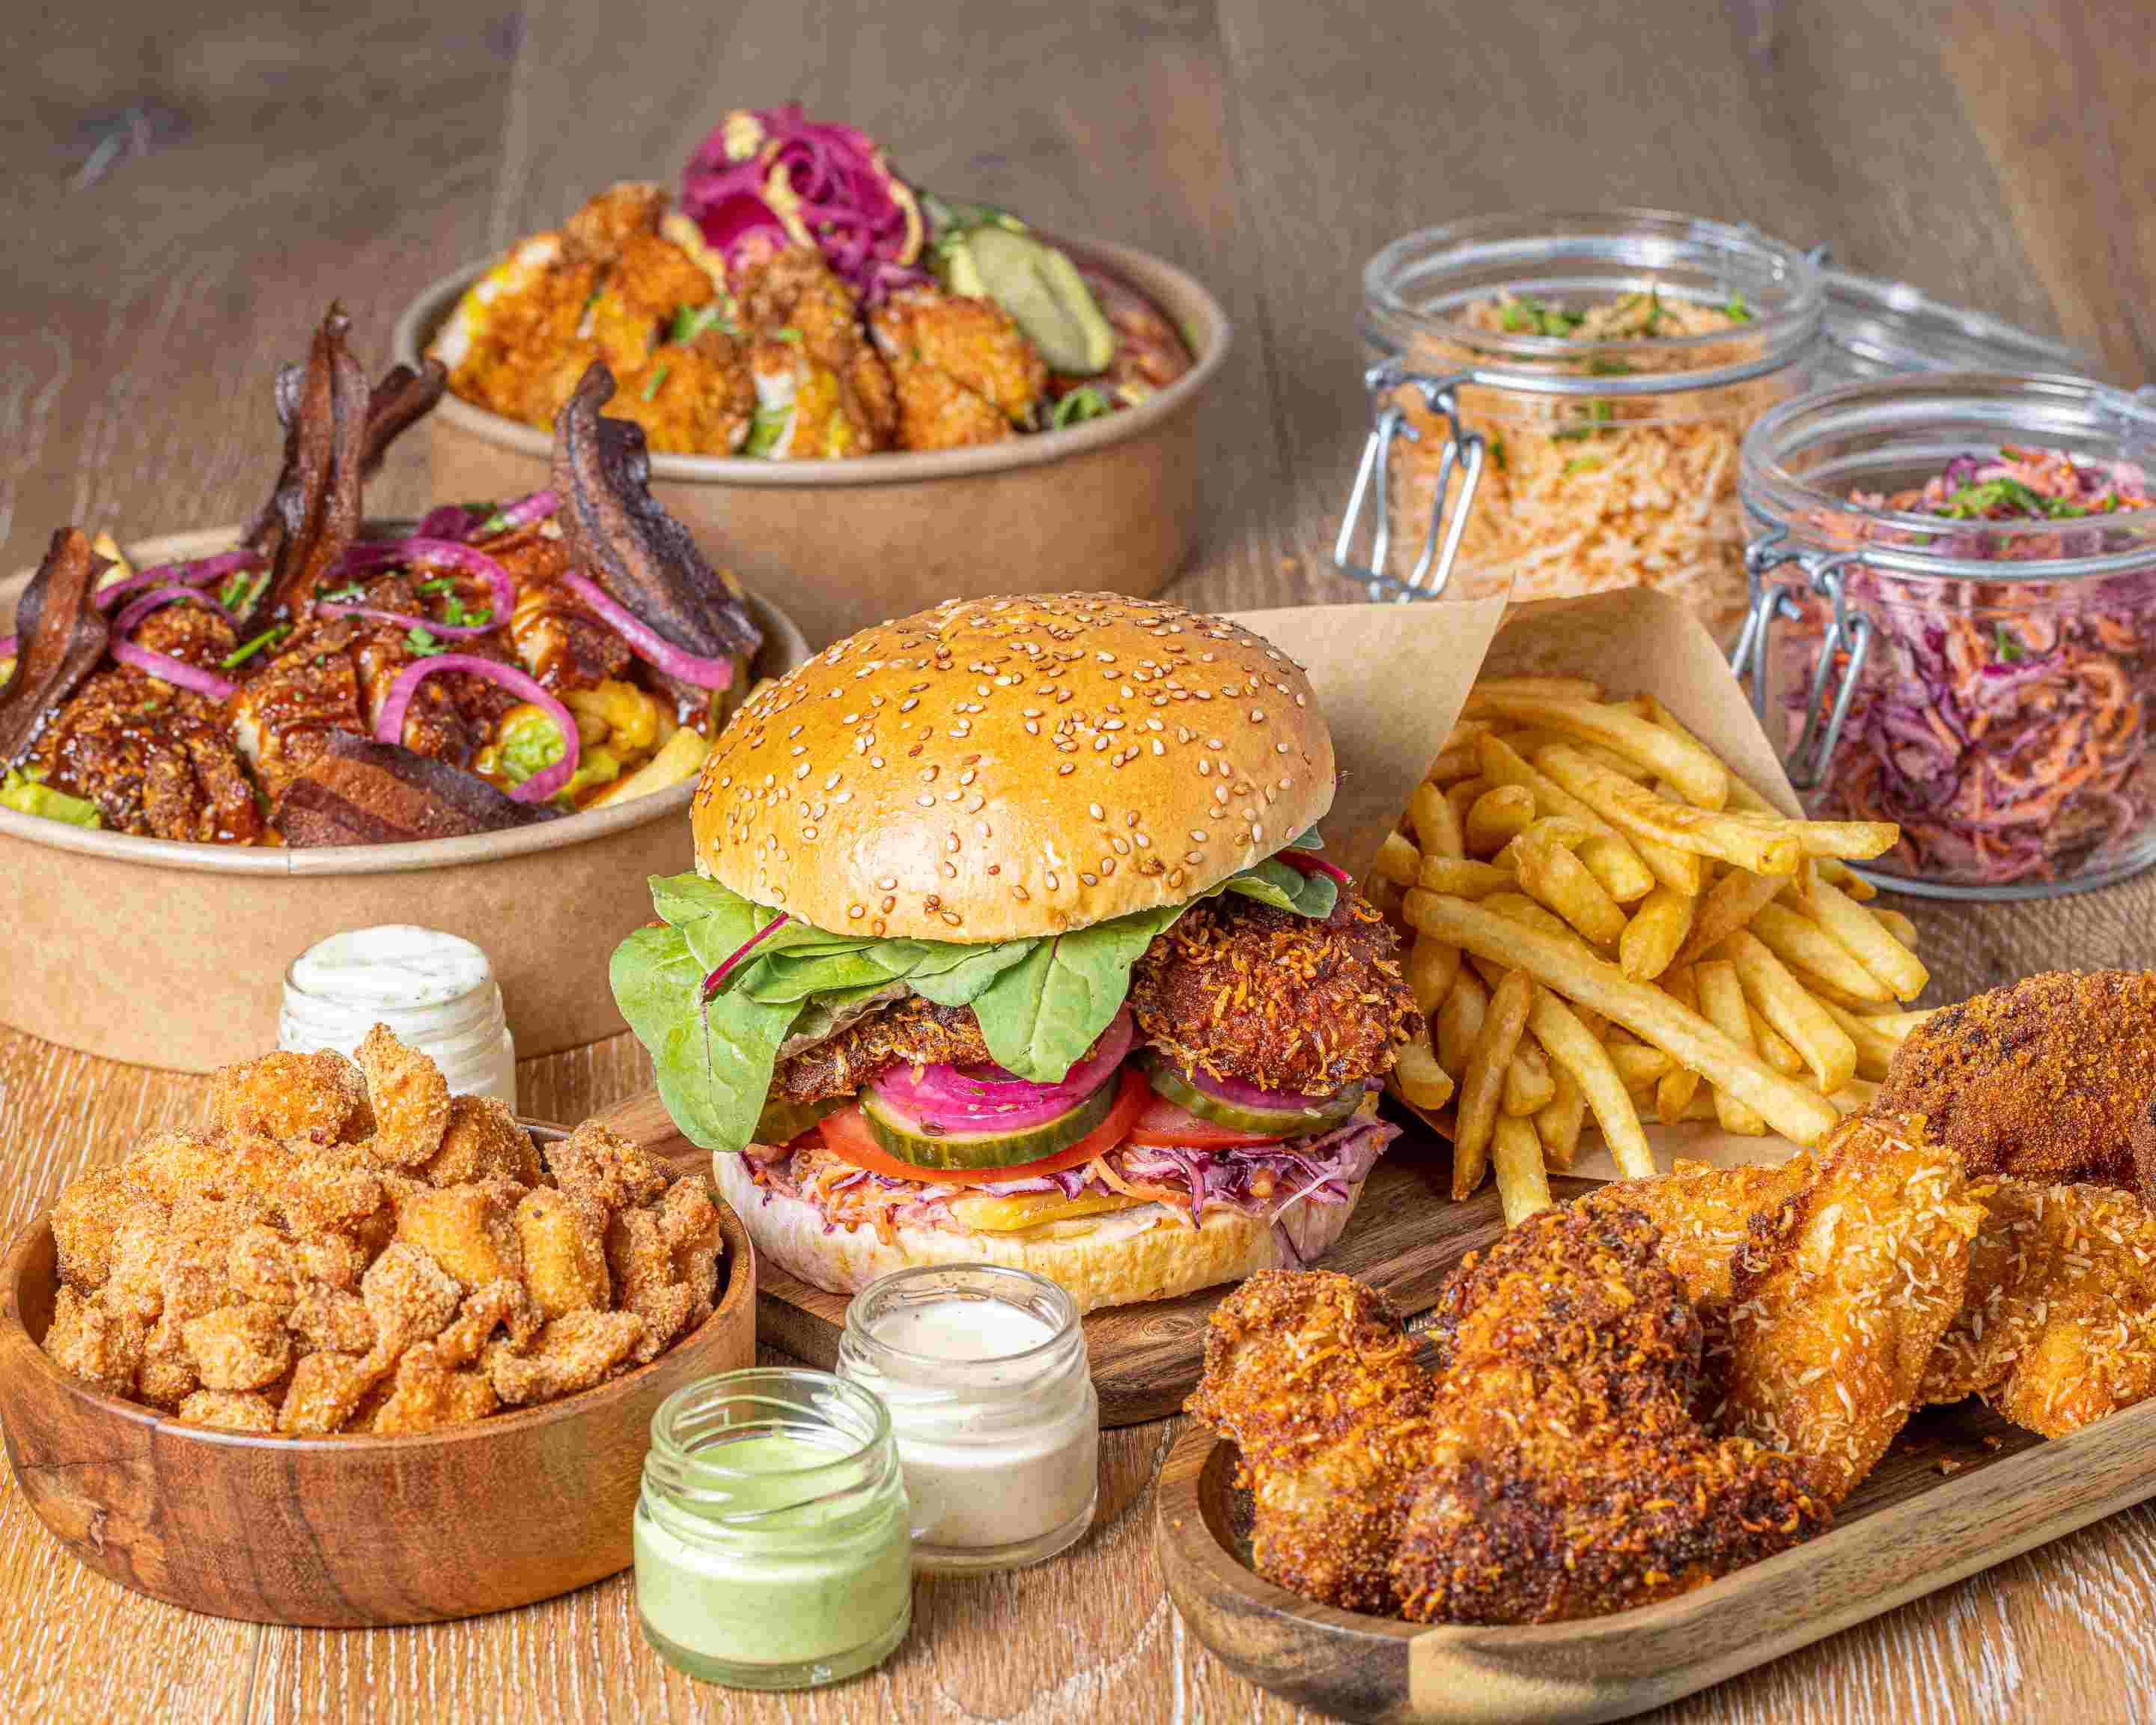 The Fried Chicken Club delivery in Genève | Takeout menu | Uber Eats